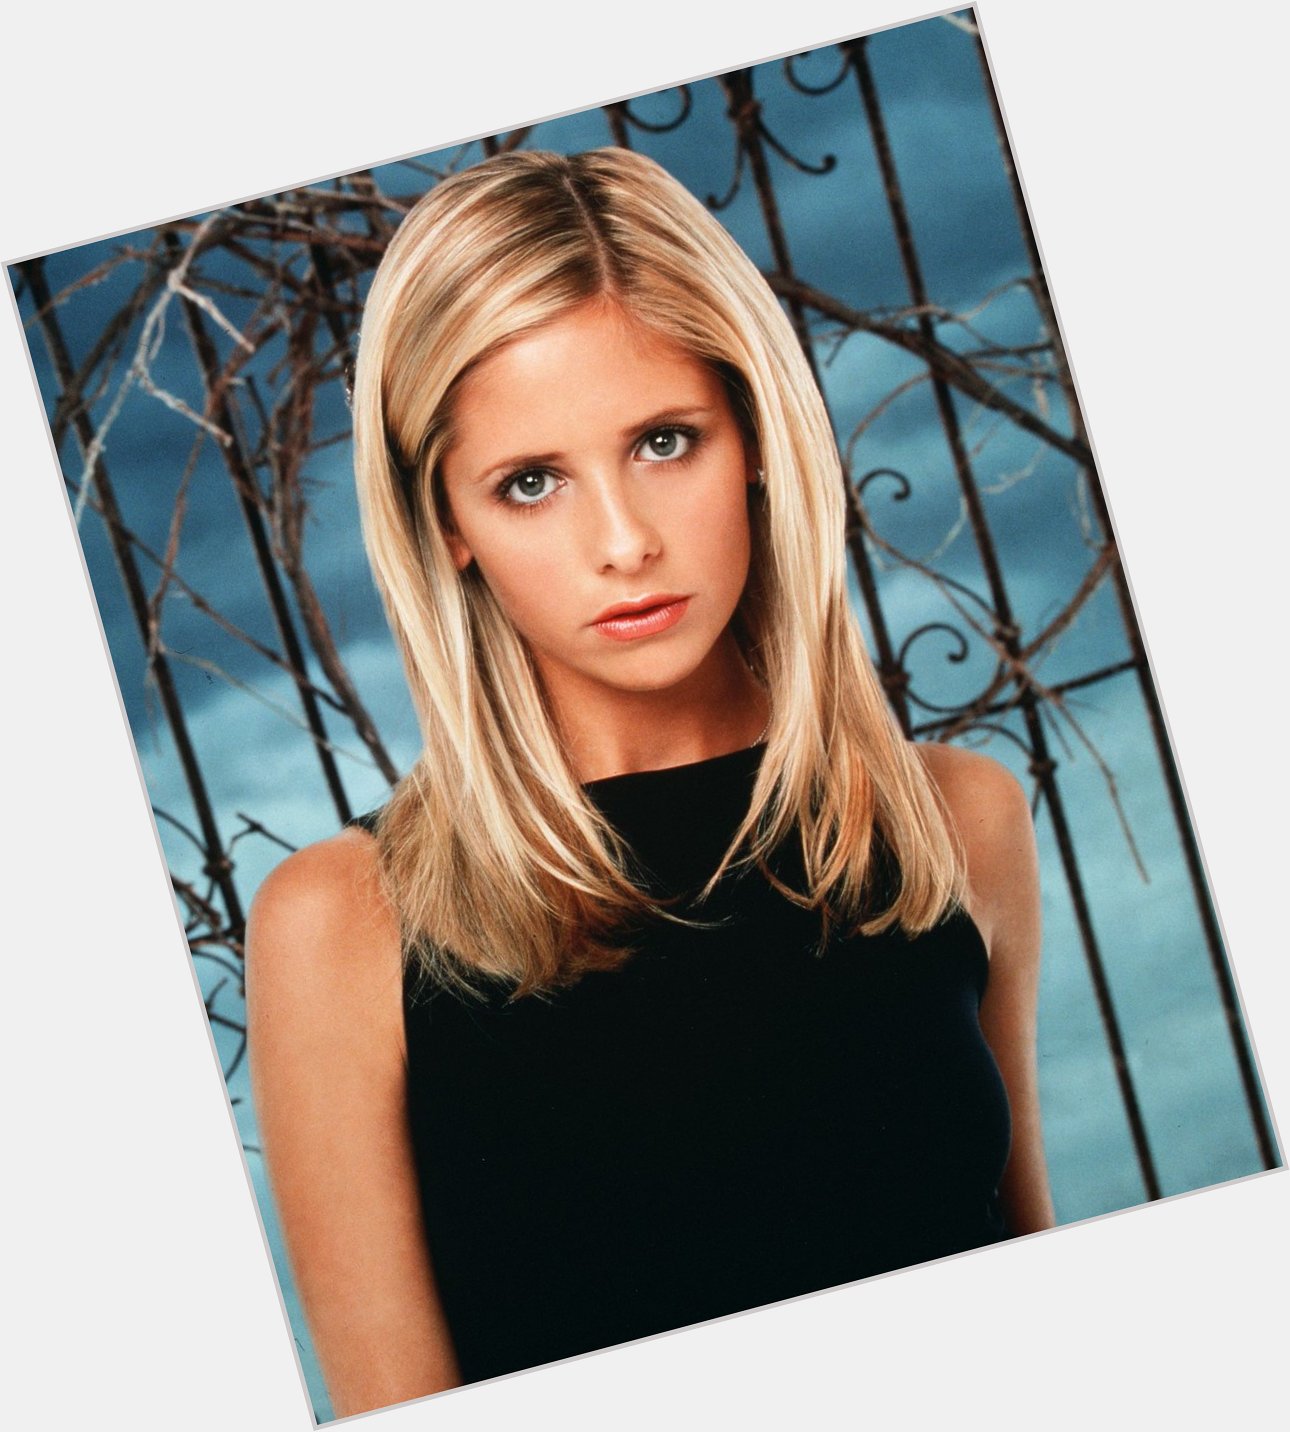 Happy Birthday Sarah Michelle Gellar! From Buffy to Cruel Intensions to Daphne in Scooby Doo sis is iconic 